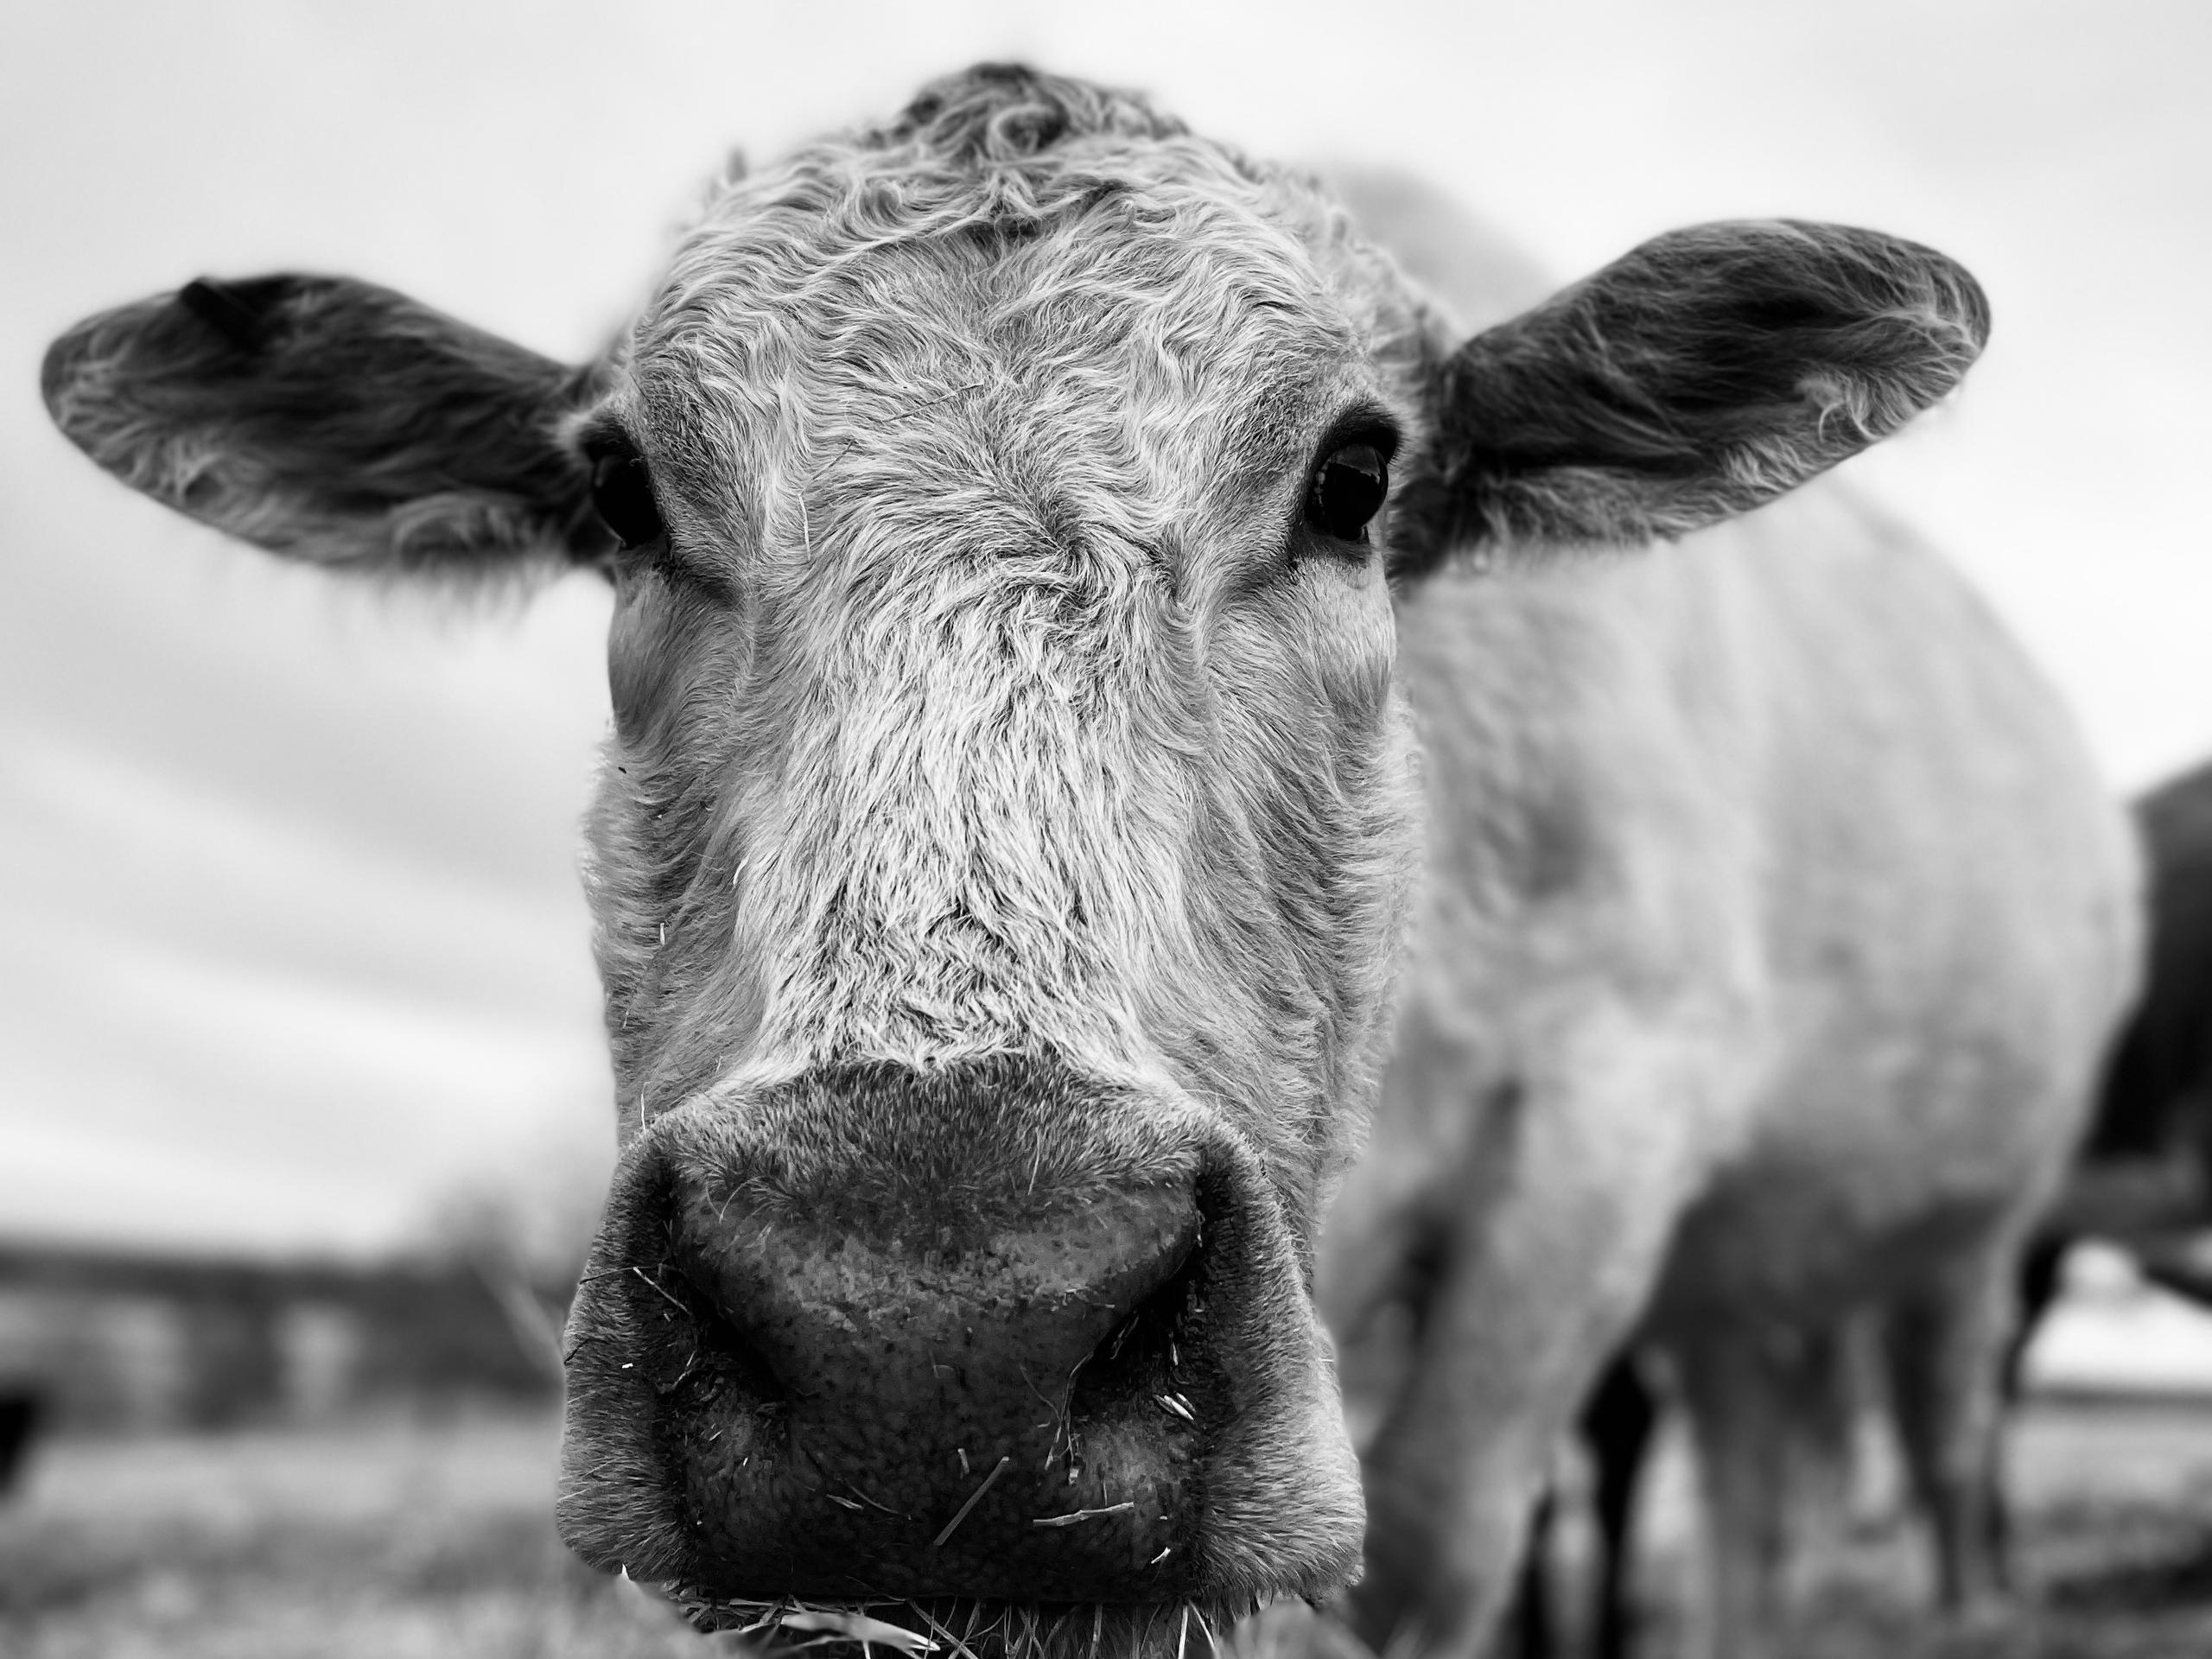 A close up photo of a cow in black and white.